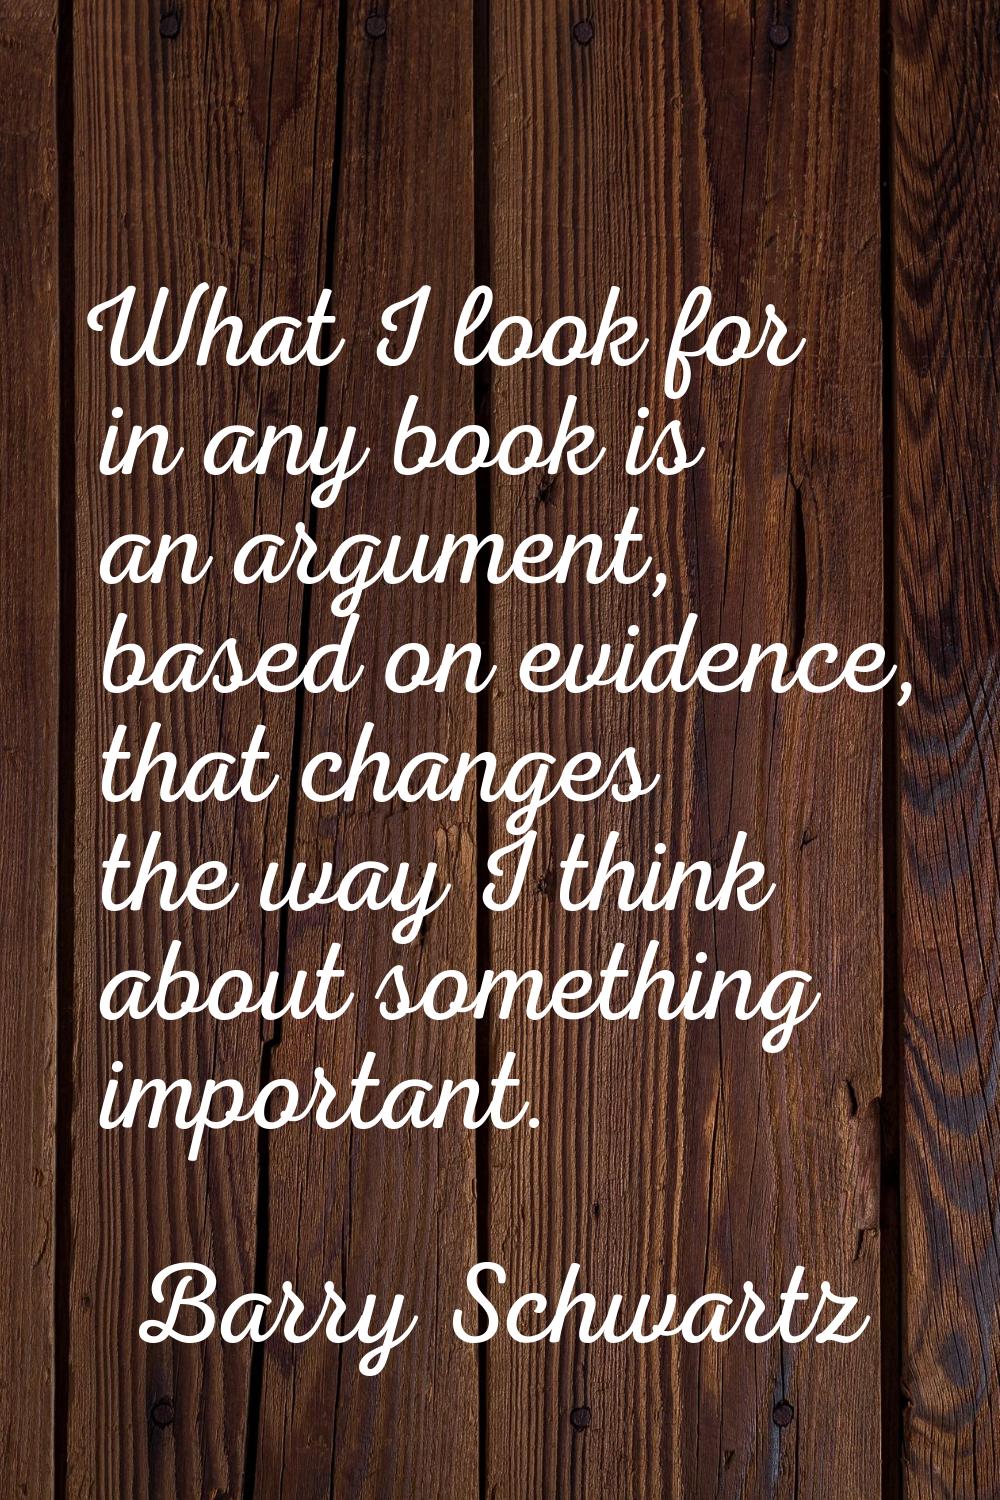 What I look for in any book is an argument, based on evidence, that changes the way I think about s